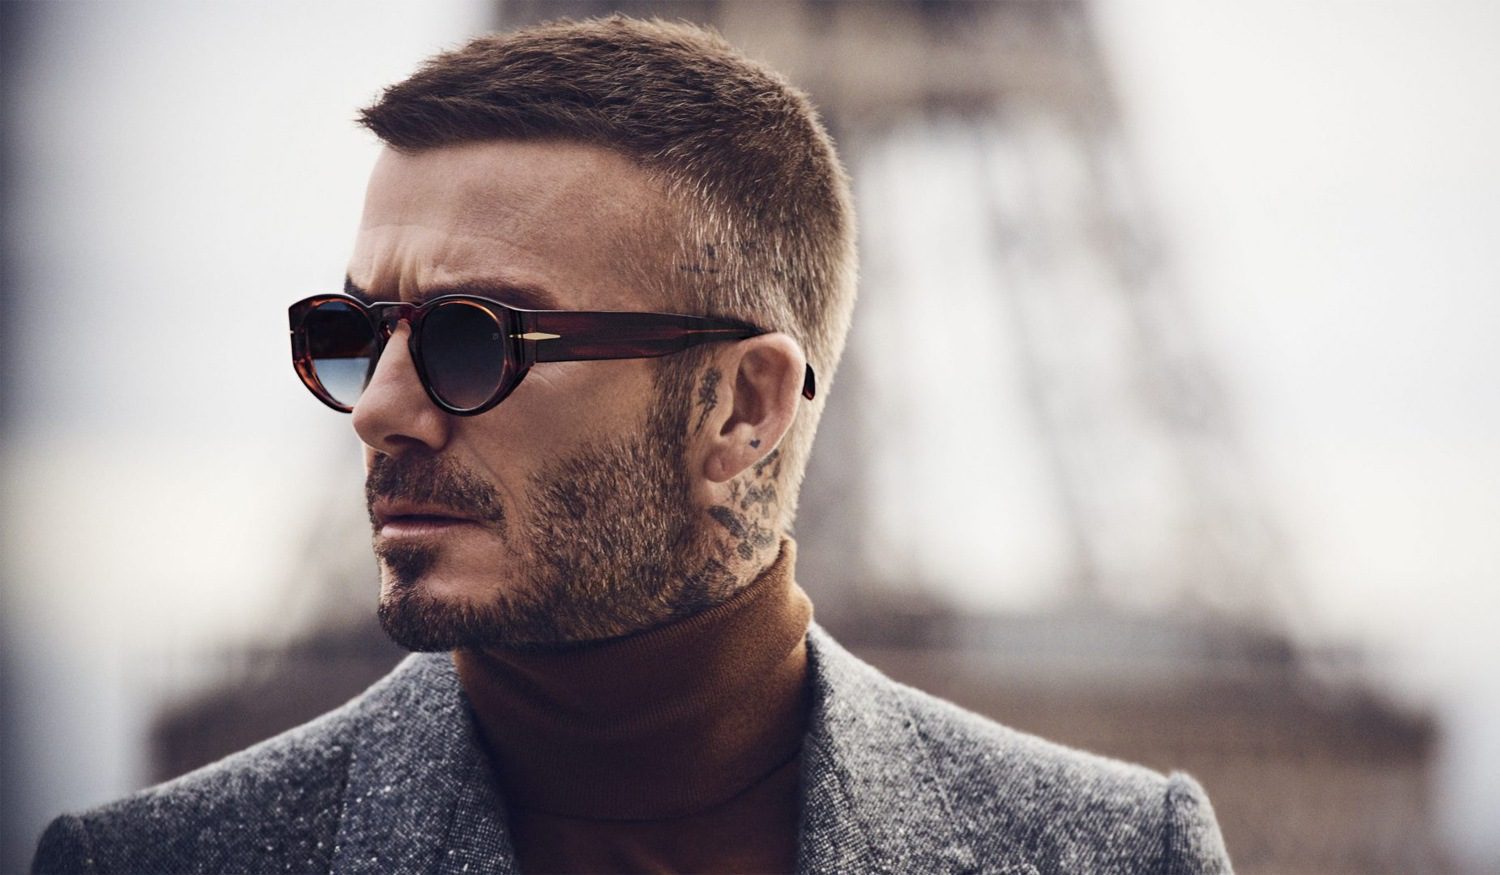 Men's Hairstyles 2019: Hottest Trends | Barber Surgeon Guild